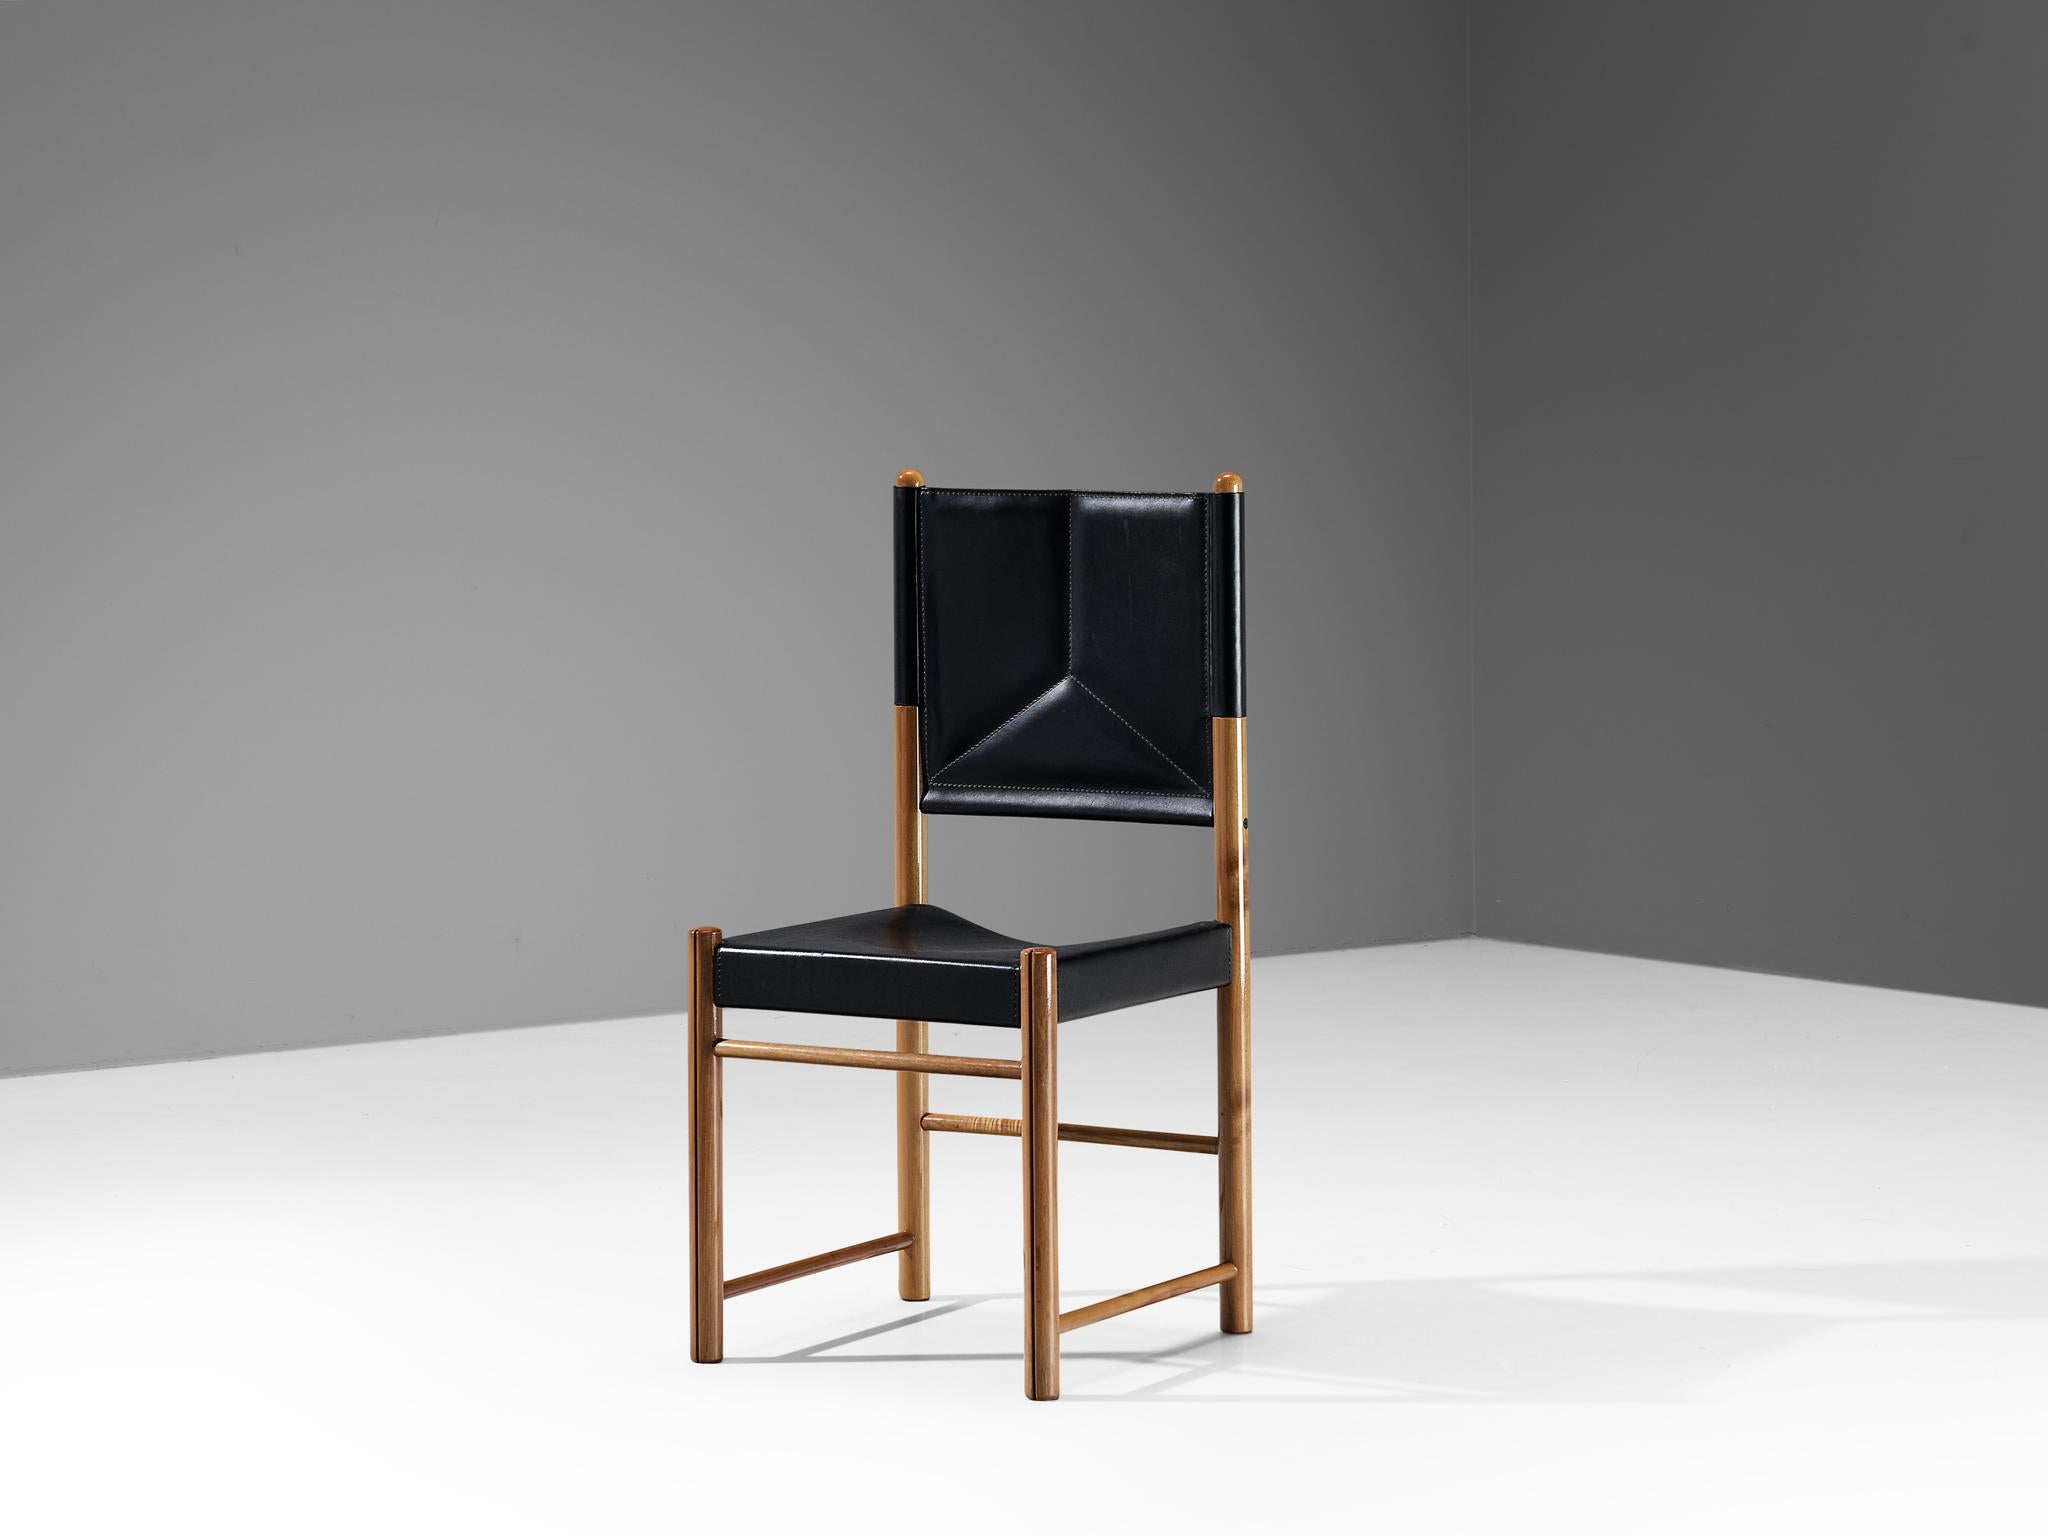 Dining chair, walnut, leather, Italy, 1970s

A delicate chair that is well-proportioned and will elevate one's interior in a vigorous and strong way. The wooden frame is composed of cylindrical beams to which the black leather is secured. The